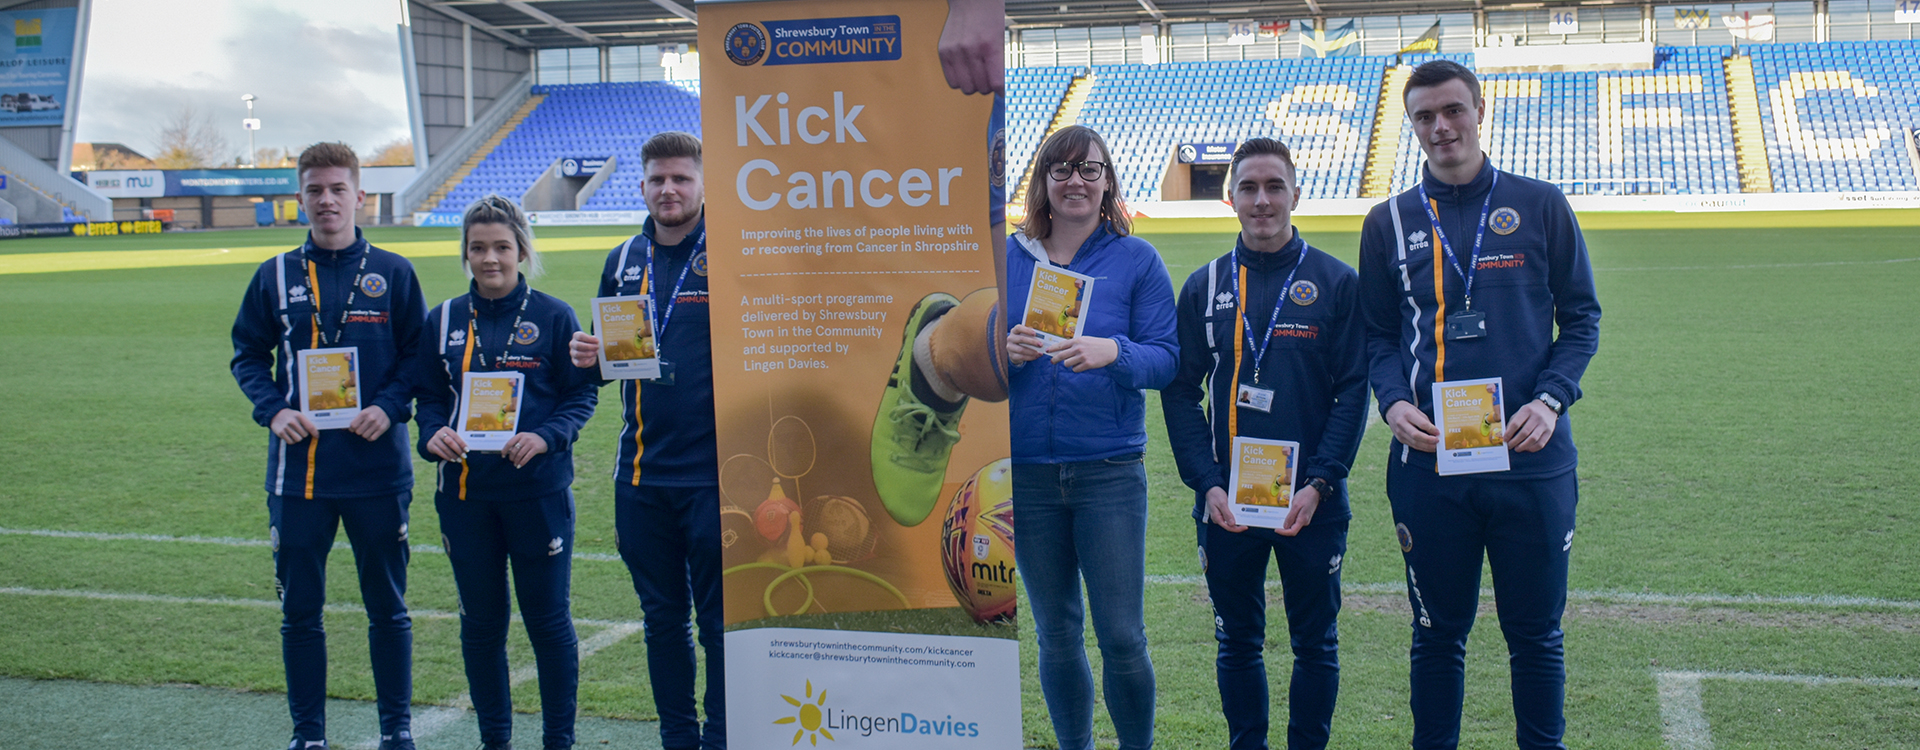 Students and Lingen Davies pose with Kick Cancer banner